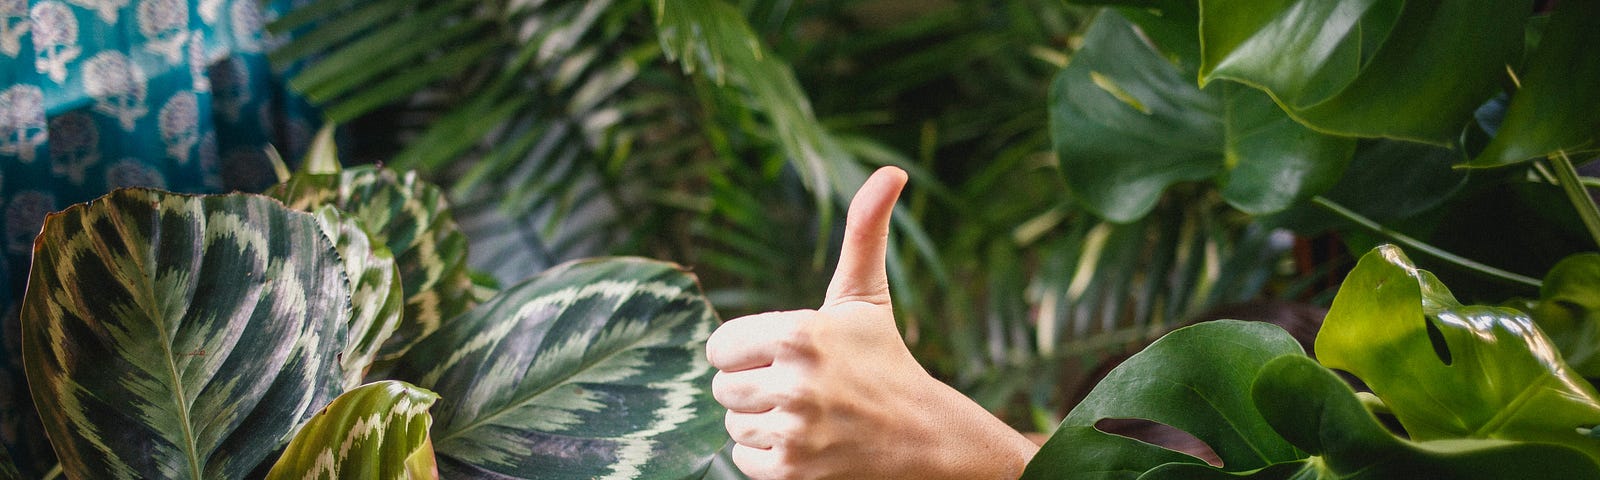 A thumbs up in the middle of plants.